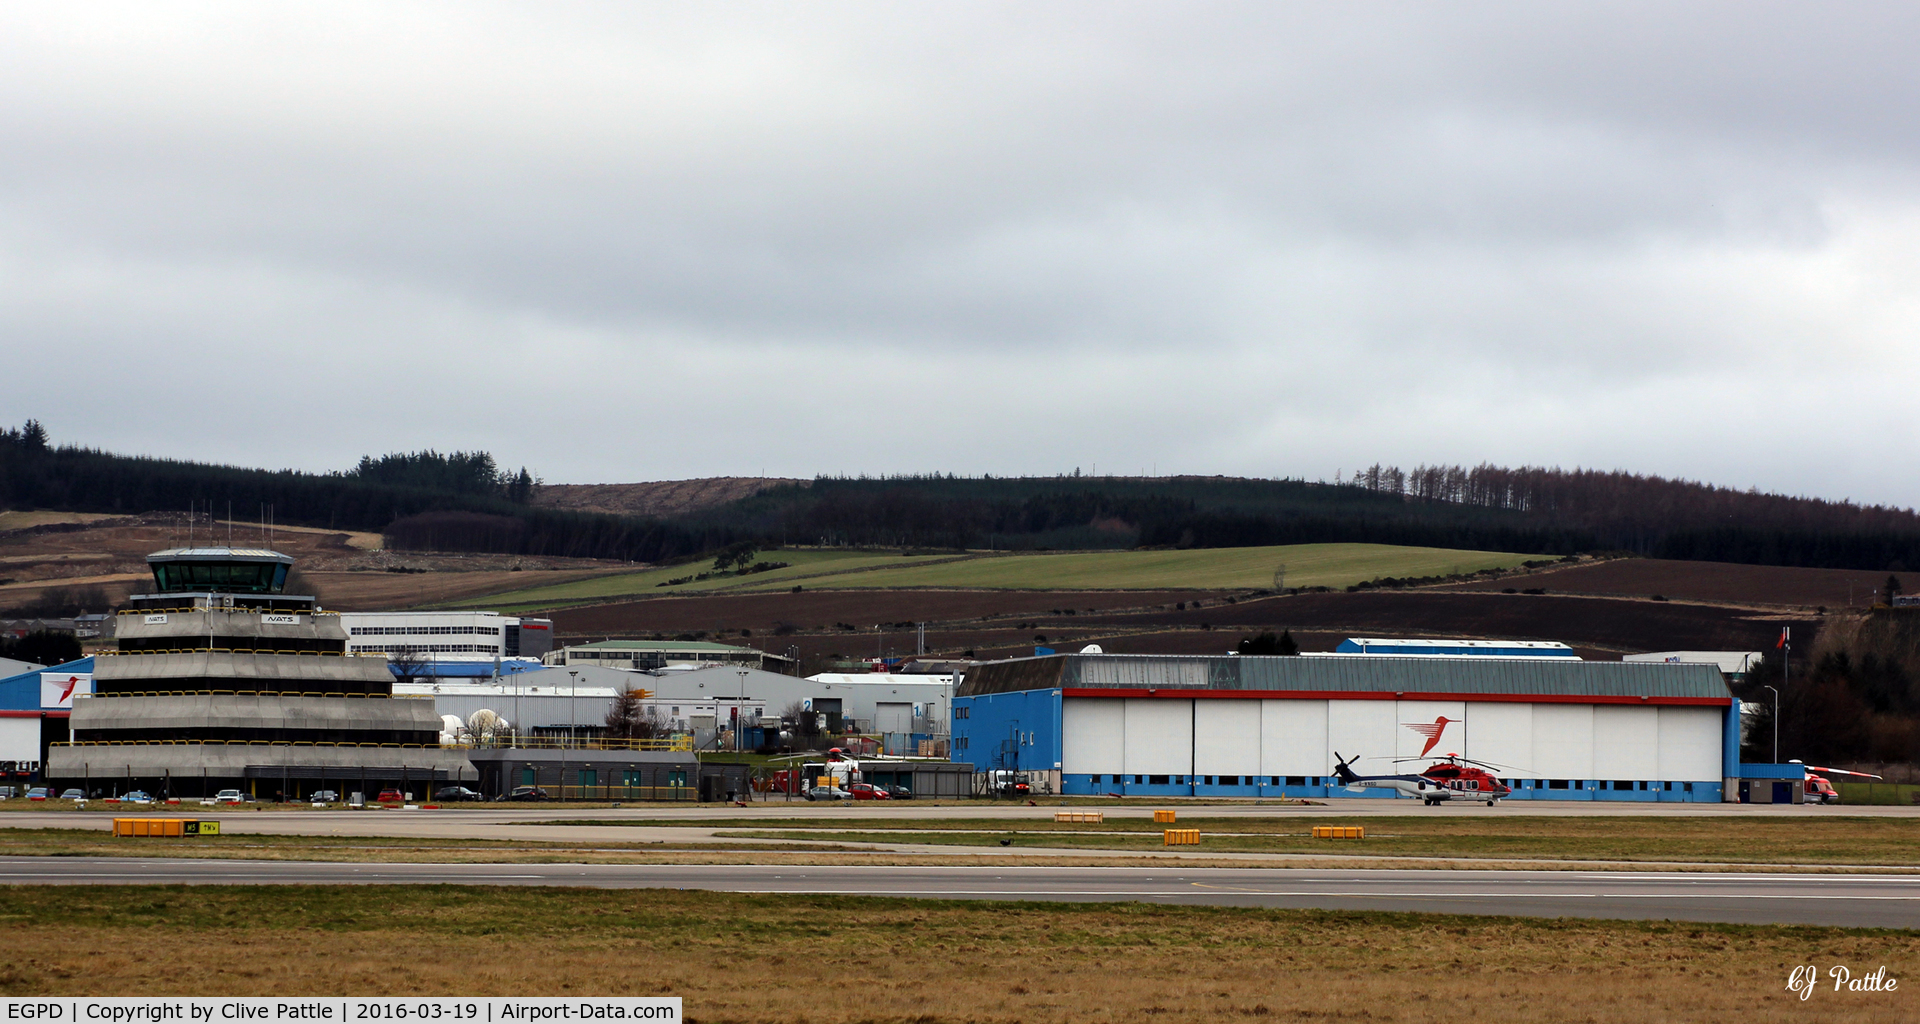 Aberdeen Airport, Aberdeen, Scotland United Kingdom (EGPD) - The west side of the airport and control tower at Aberdeen EGPD